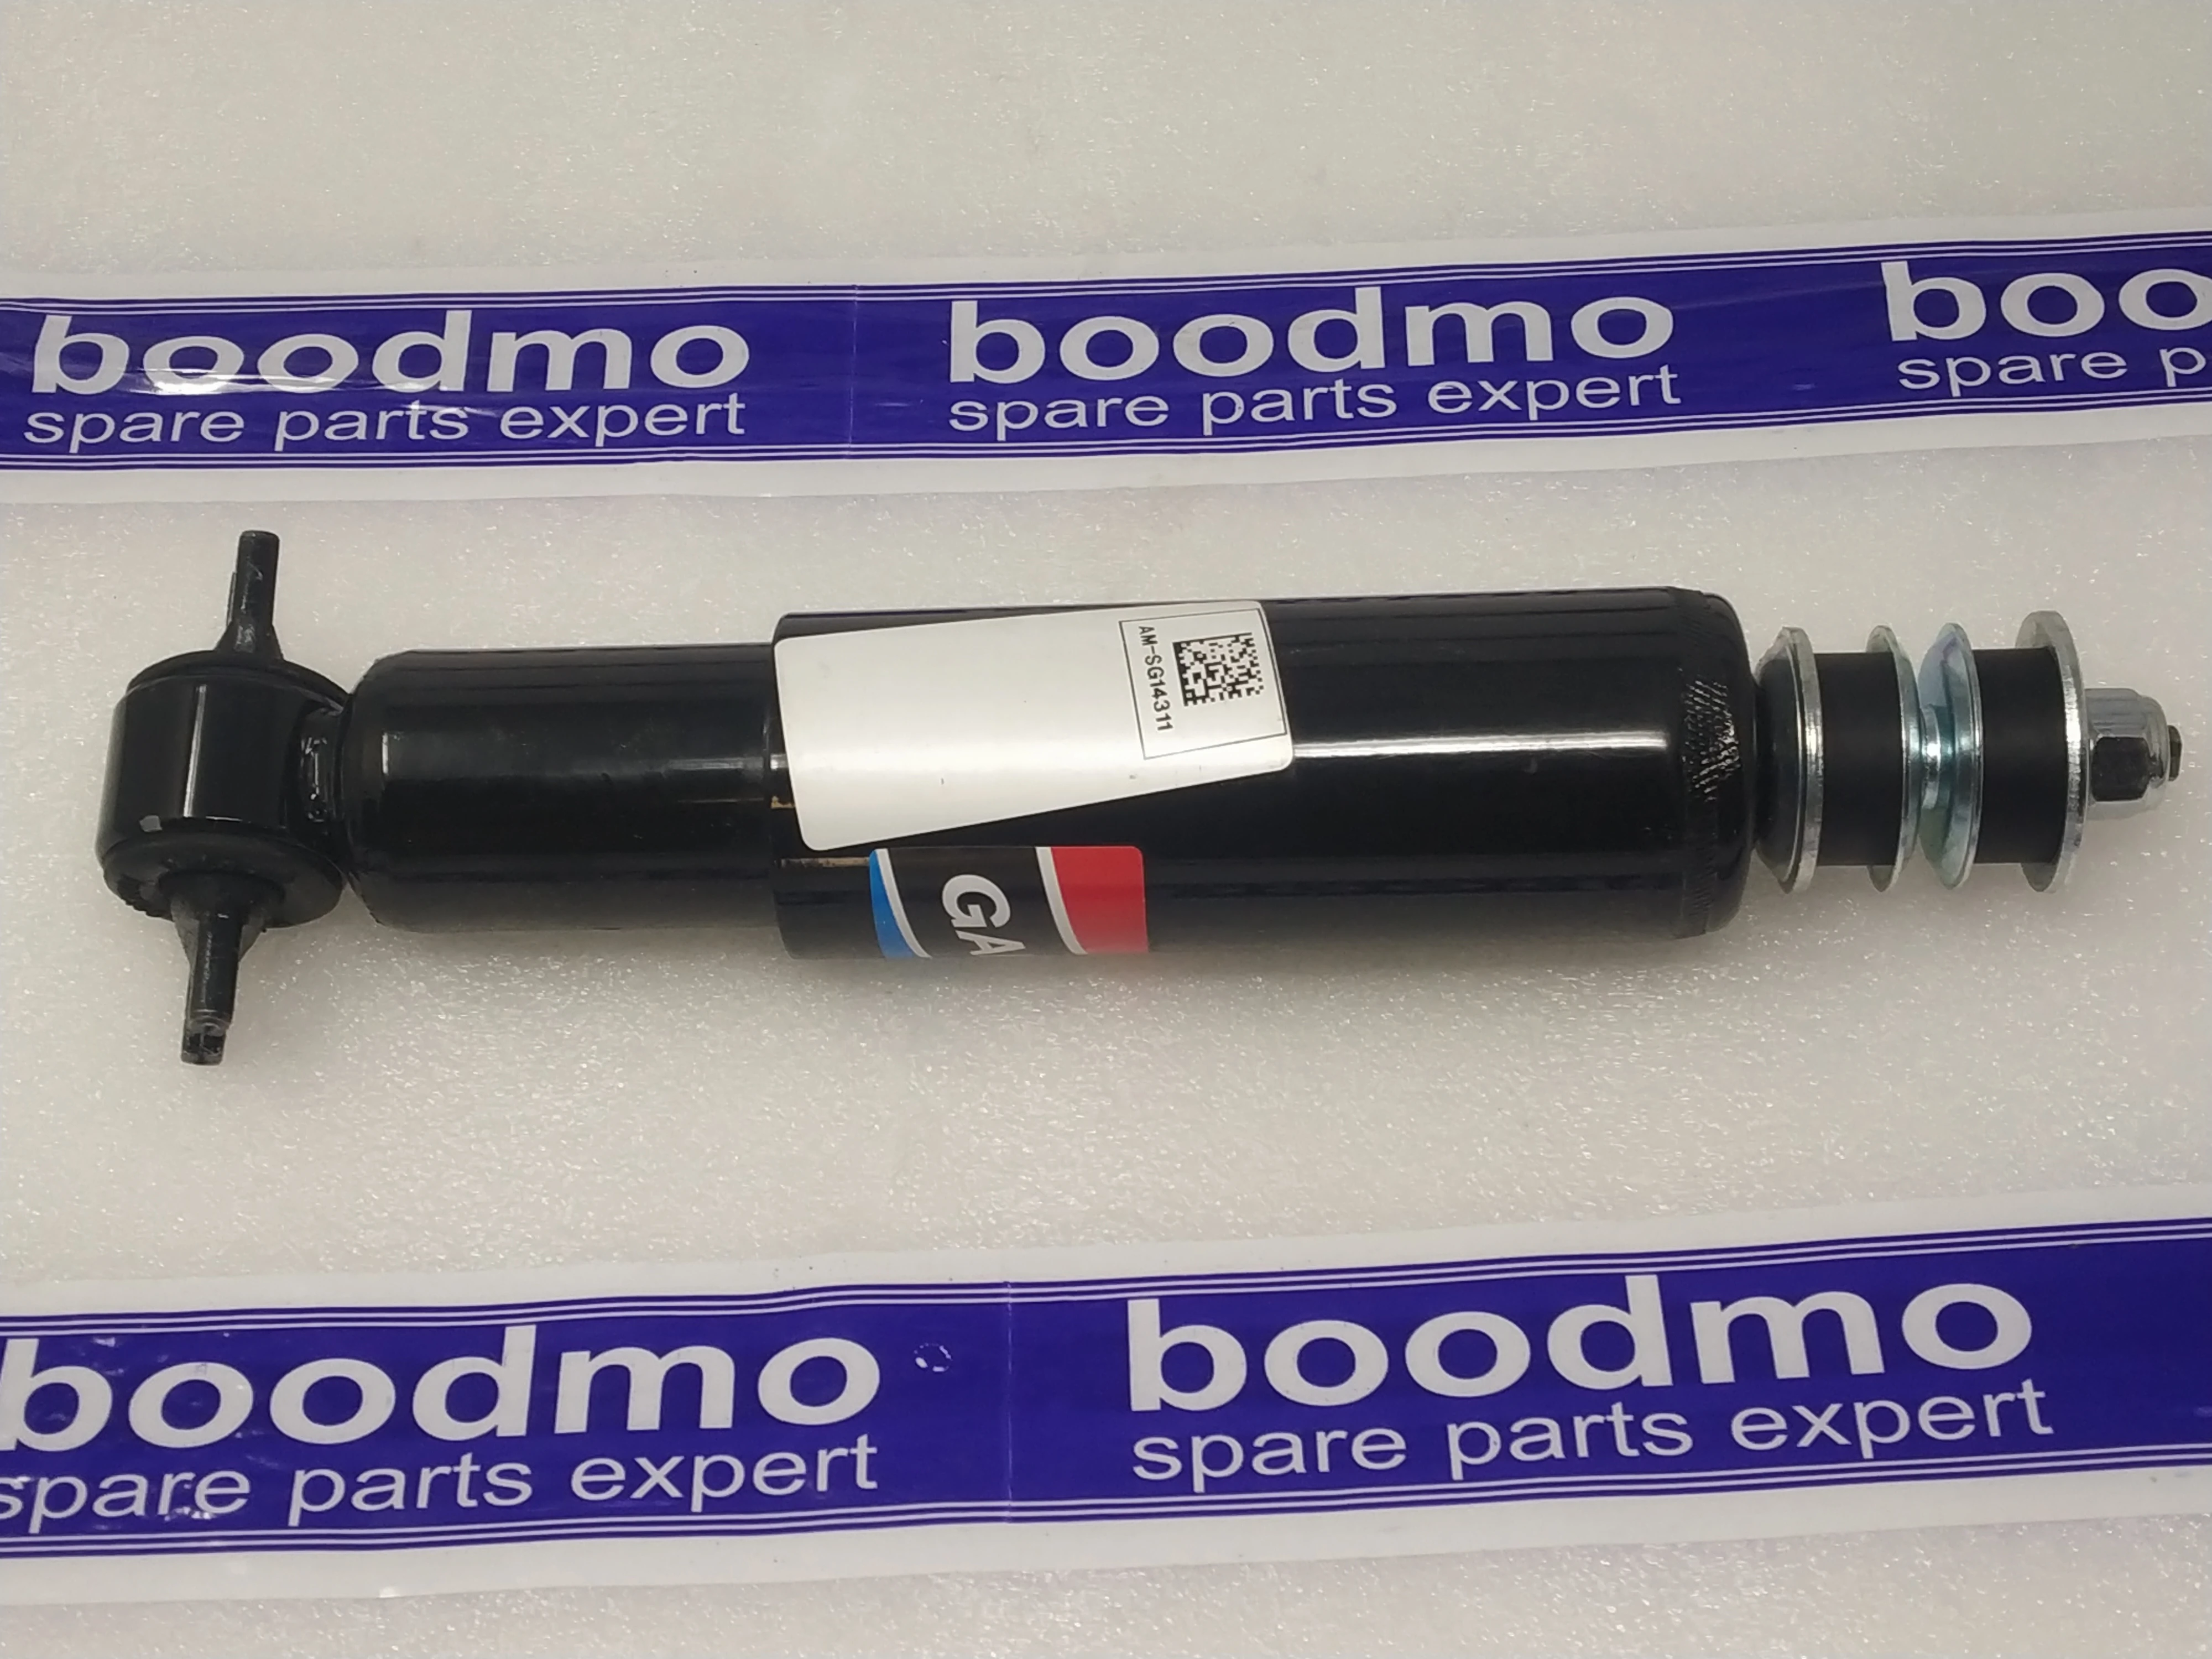 Front Shock Absorber: GABRIEL AM-4311 -compatibility, features